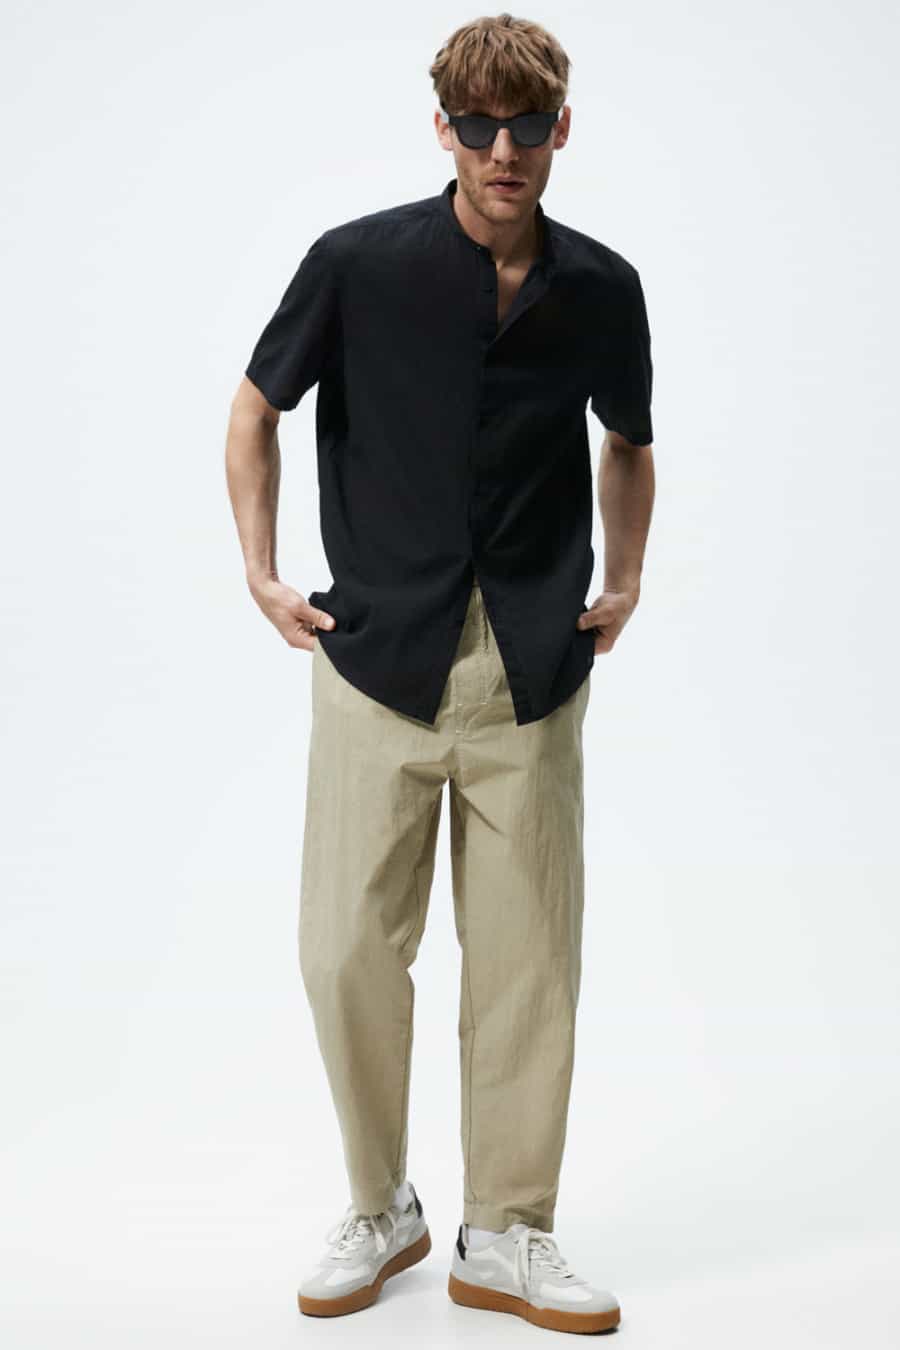 Men's wide legged khaki pants, black short sleeved shirt and white sneakers outfit